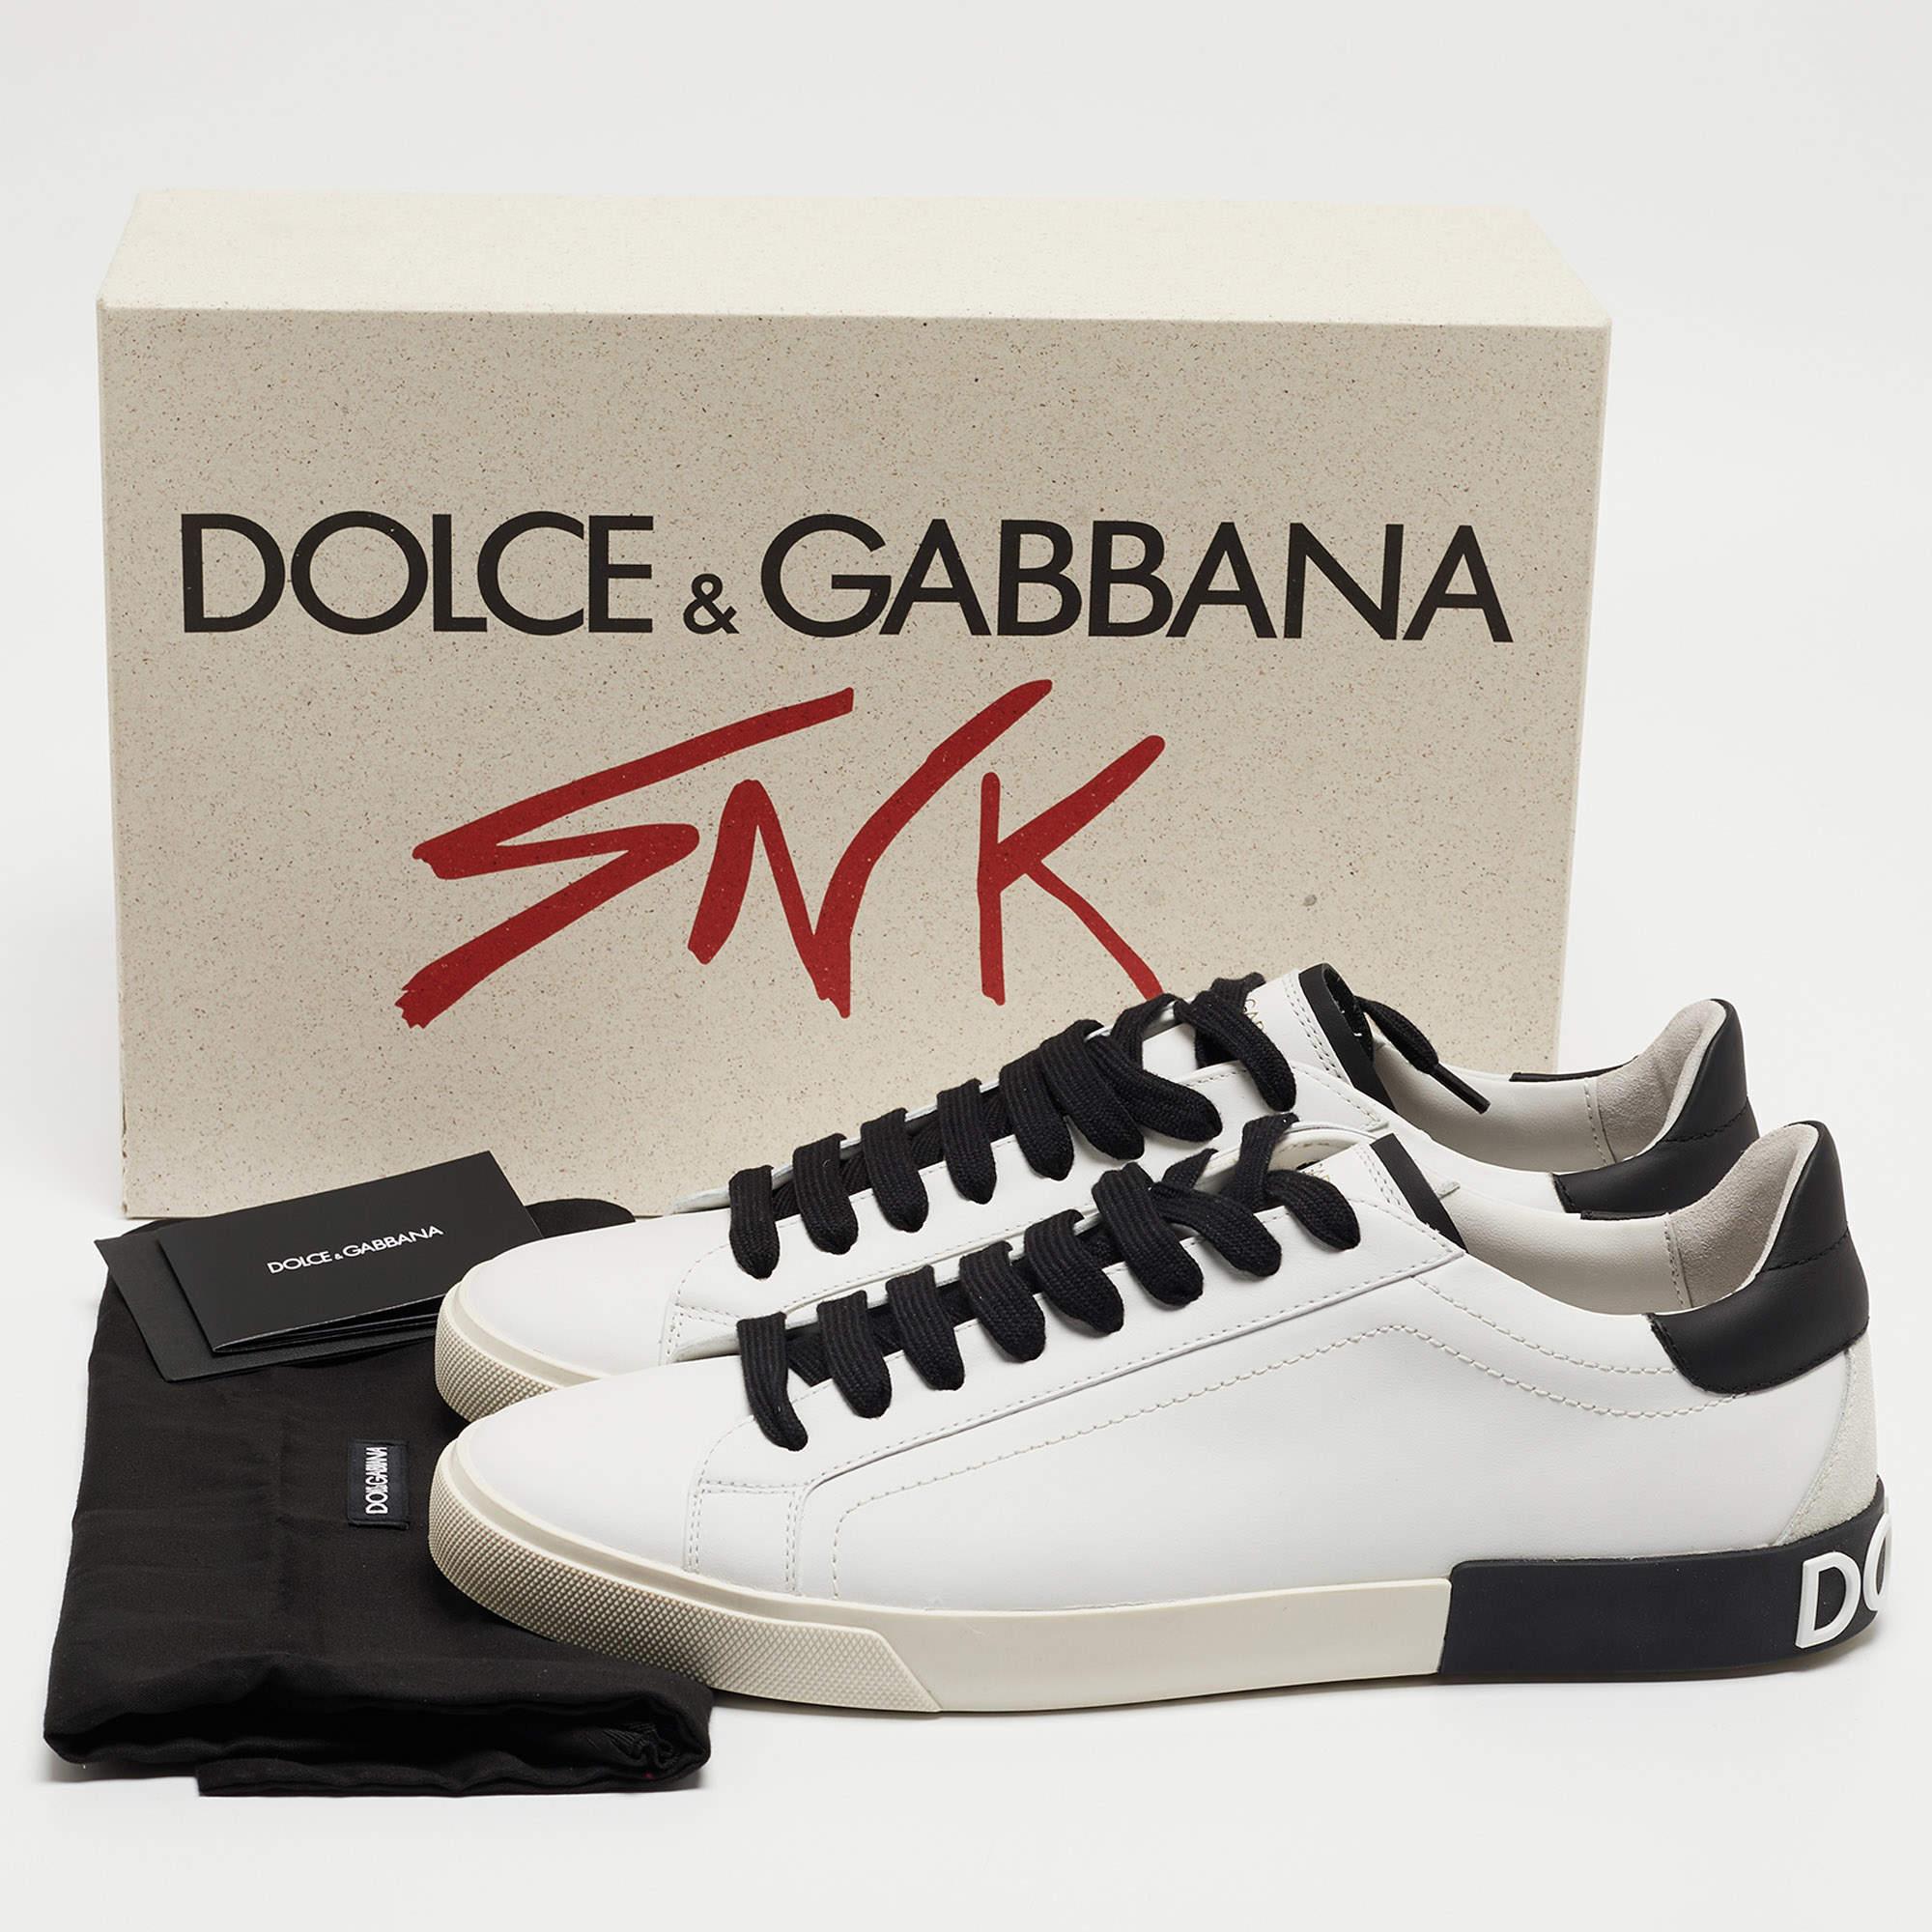 Dolce & Gabbana White/Black Leather Low Top Sneakers Size 45 7